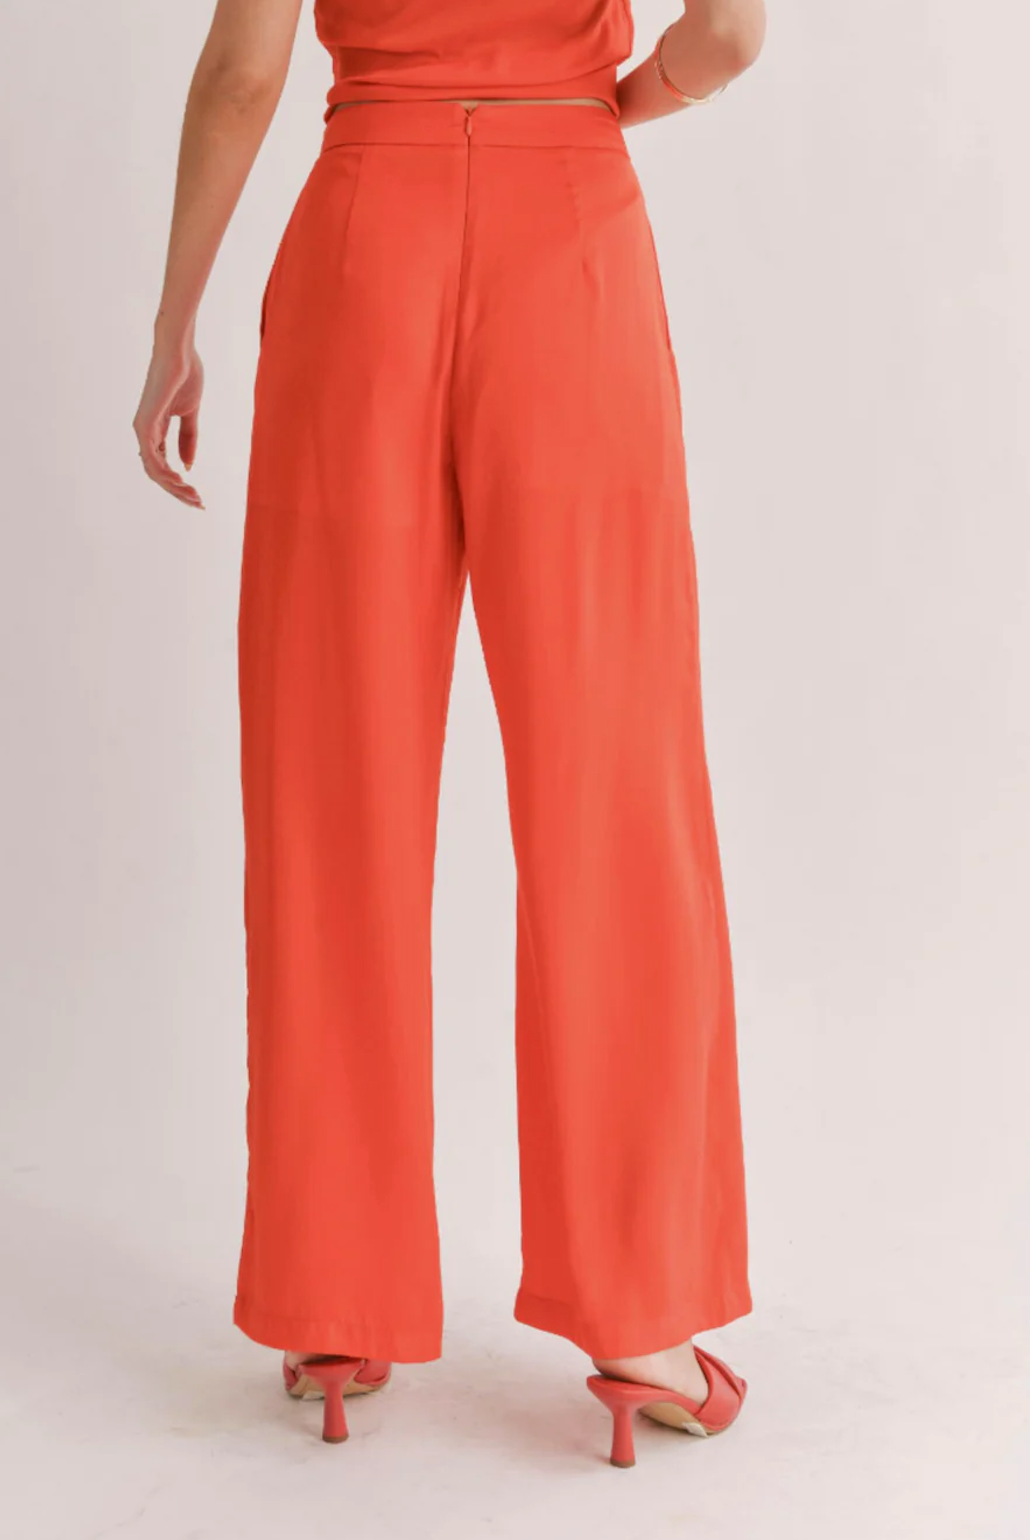 SAGE THE LABLE DREAM SKIES PLEATED WIDE LEG PANTS IN RED ORANGE